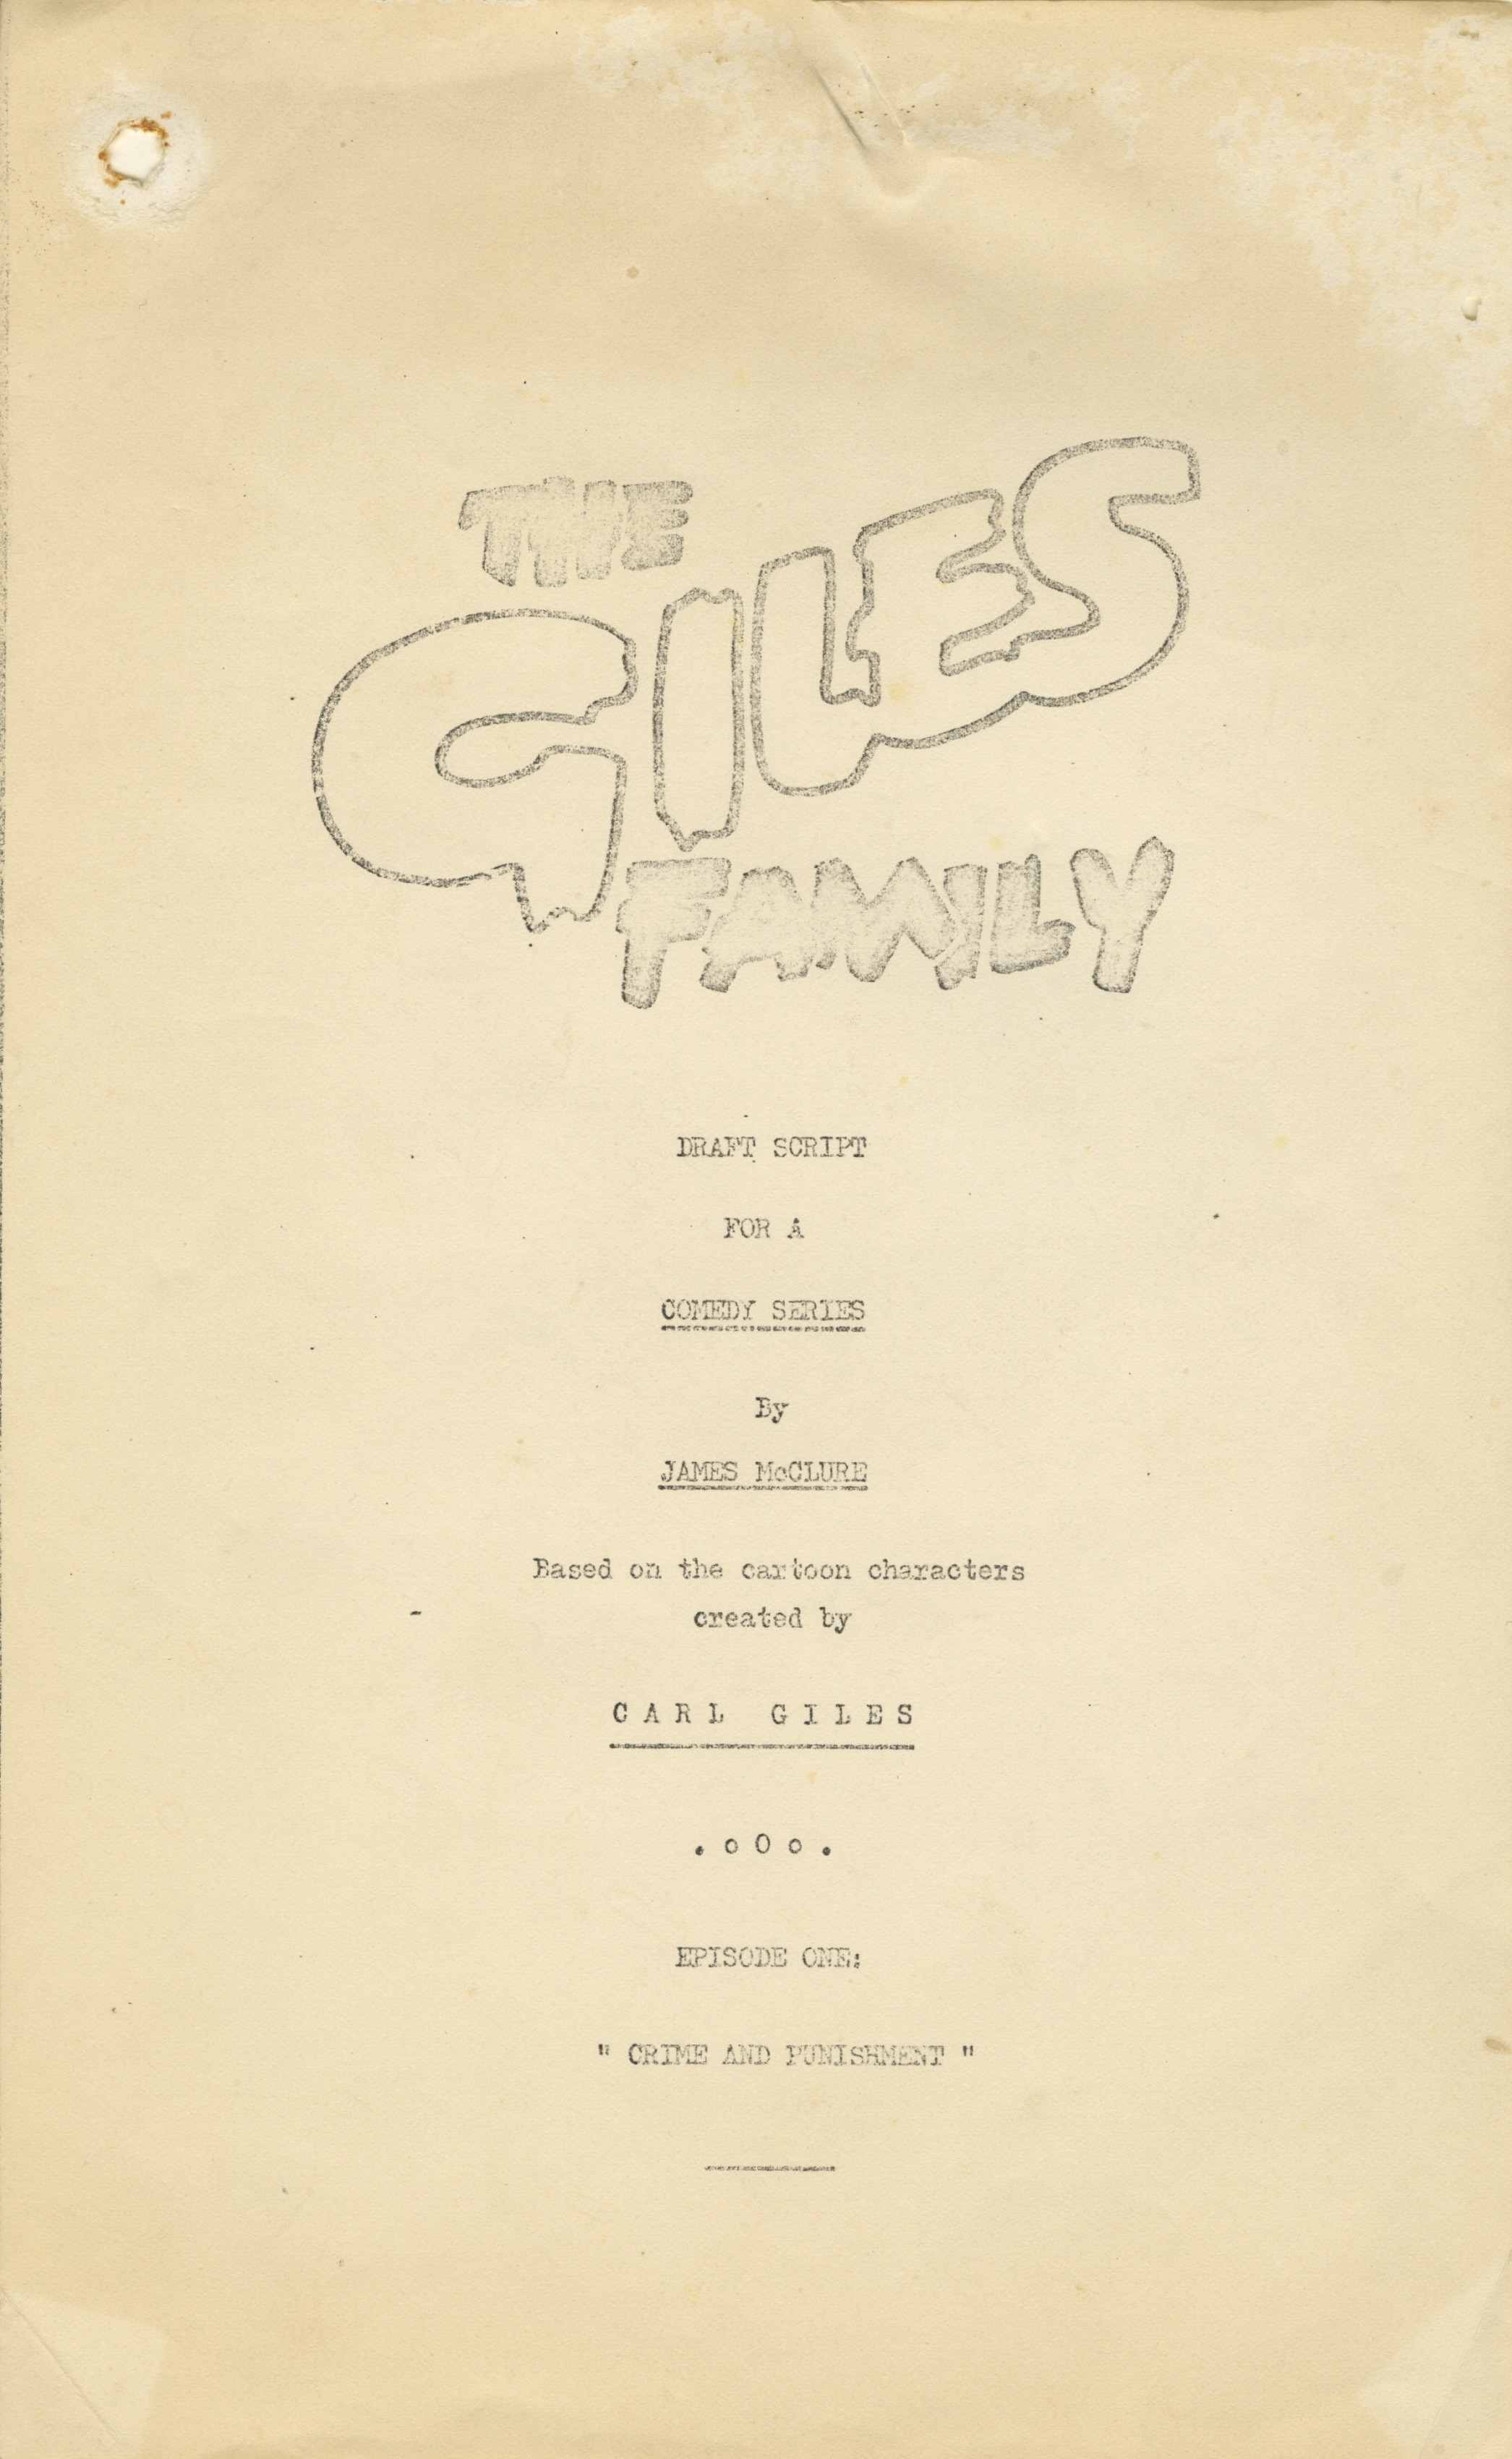 Front page of draft script for an episode of an animated comedy series about the Giles Family - James McClure, undated (Image ref: GACS00775A)